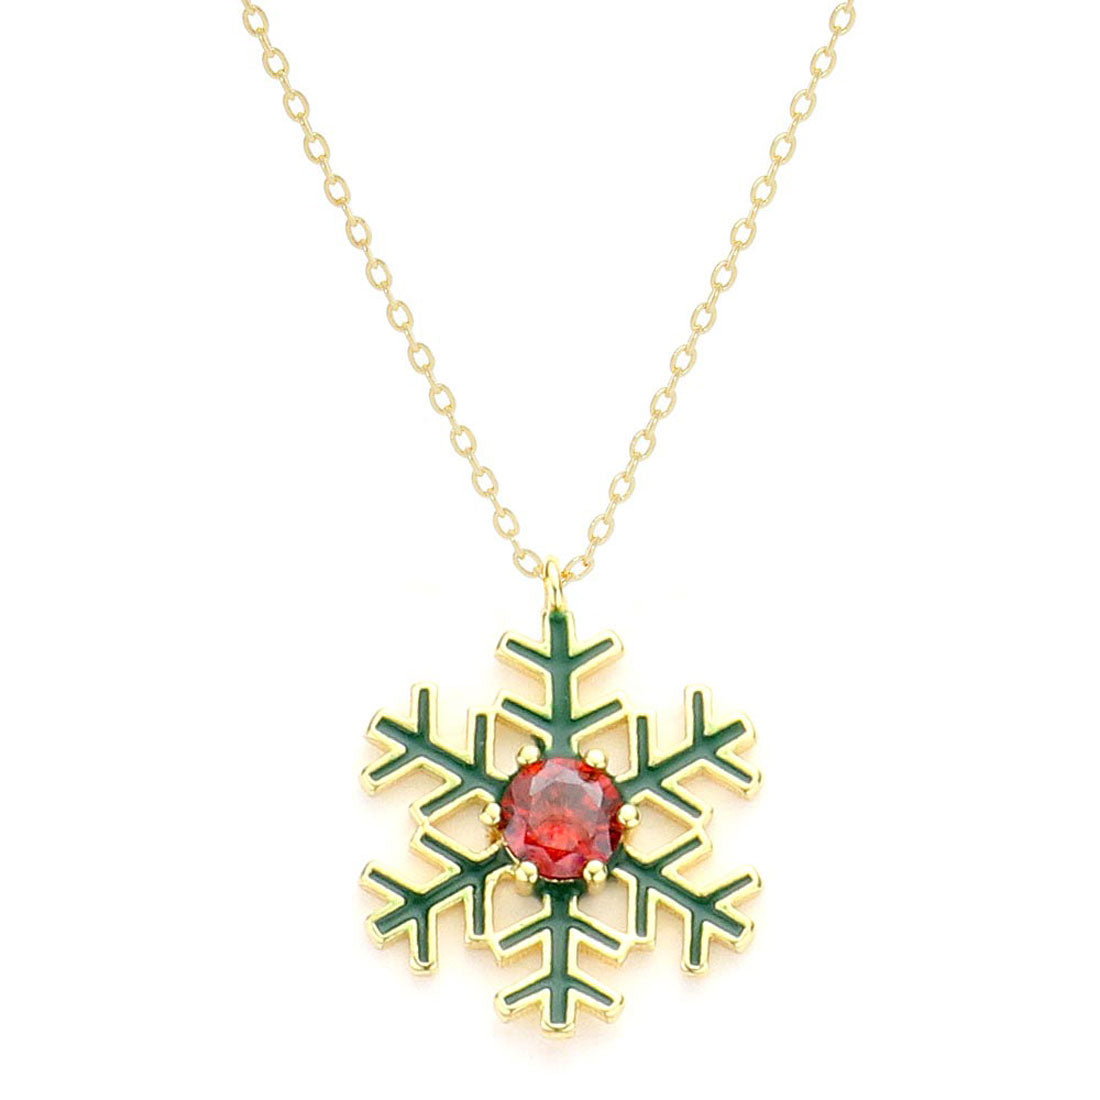 Gold Gold White Dipped CZ Snowflake Pendant Necklace, Get ready with these Pendant Necklace, put on a pop of color to complete your ensemble. Perfect for adding just the right amount of shimmer & shine and a touch of class to special events. Perfect Birthday Gift, Anniversary Gift, Mother's Day Gift, Graduation Gift.